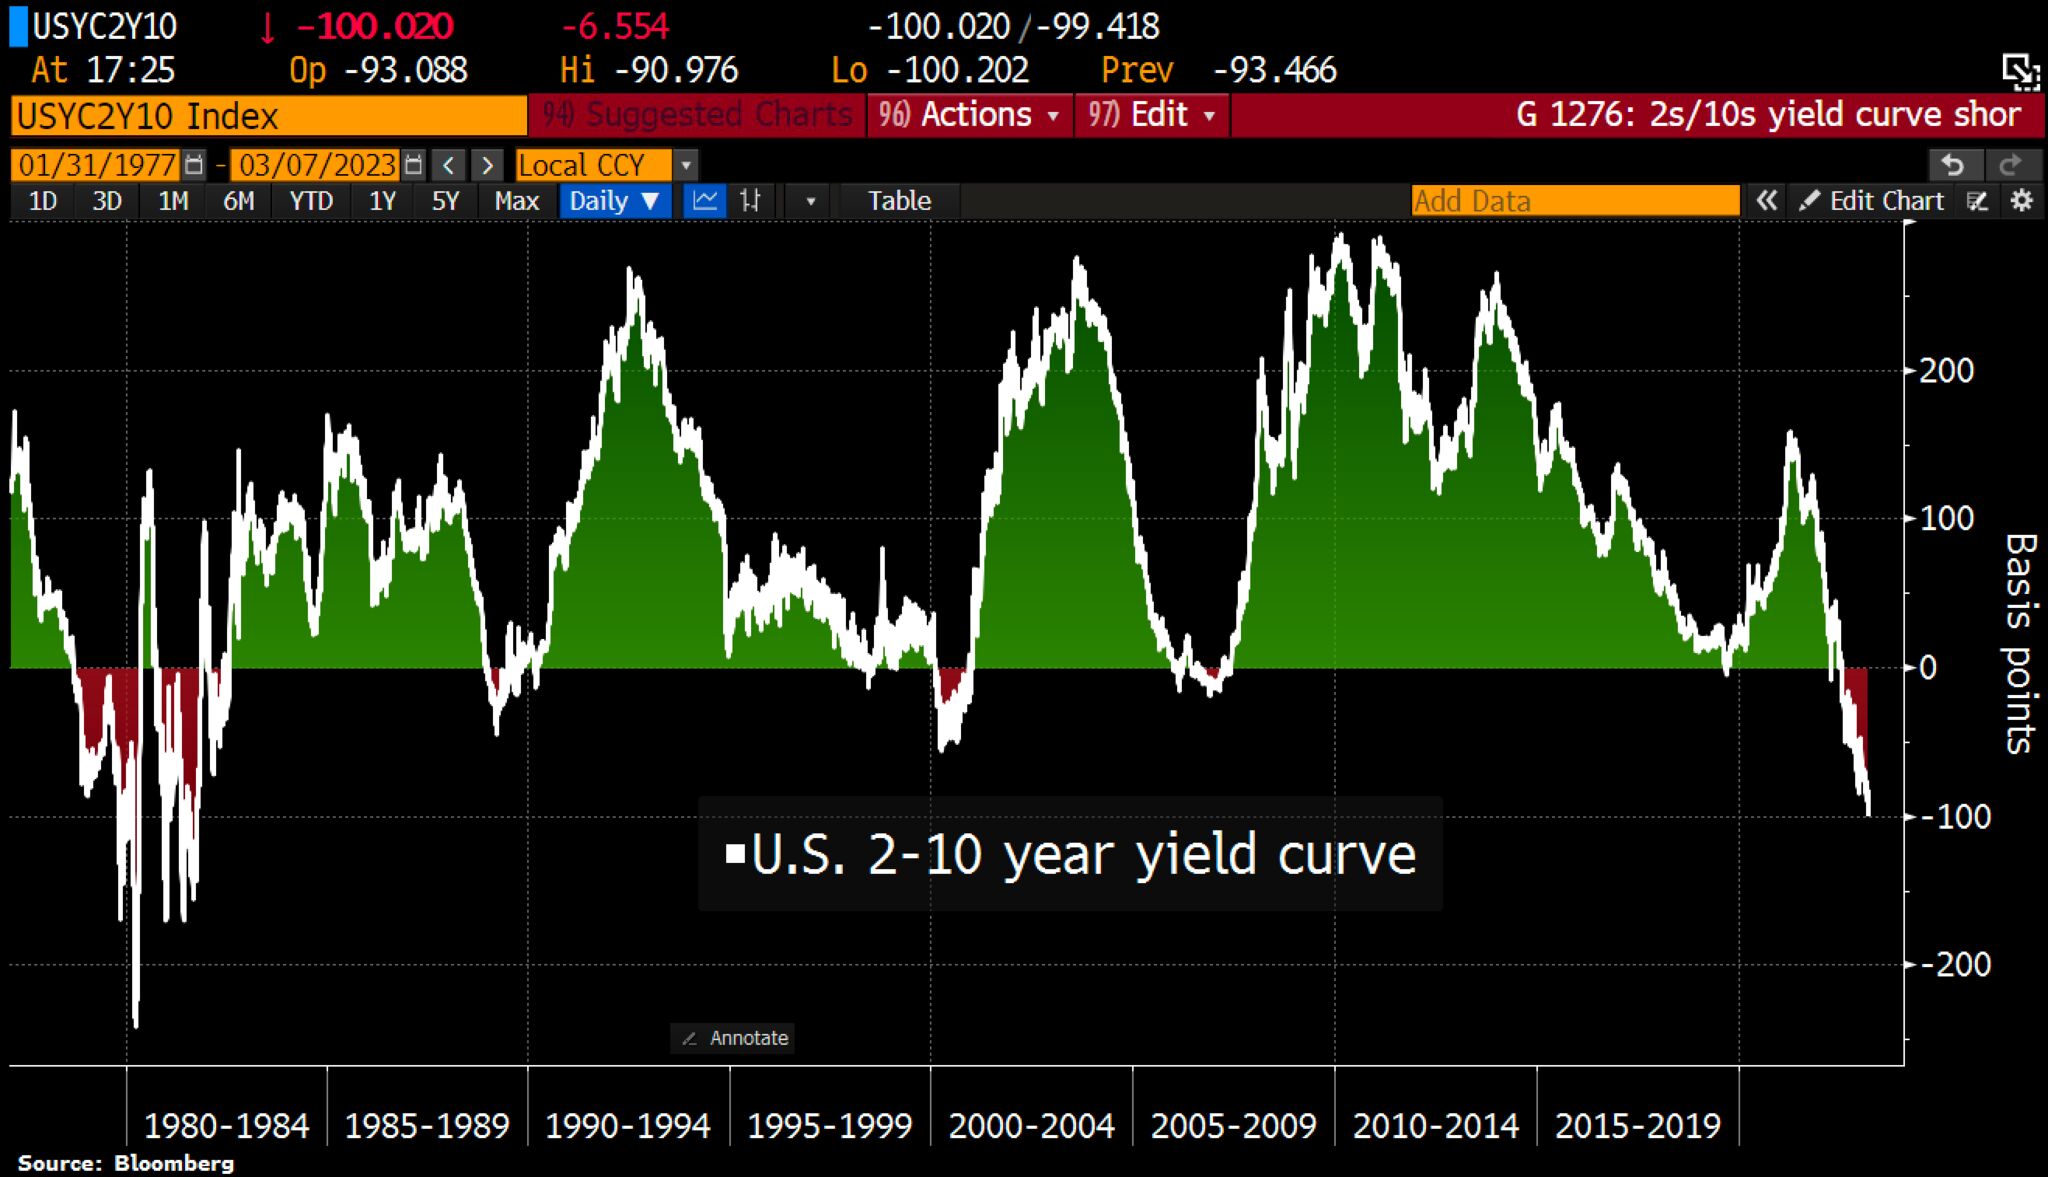 US YIELD CURVE INVERSION HIT 100 BASIS POINTS!